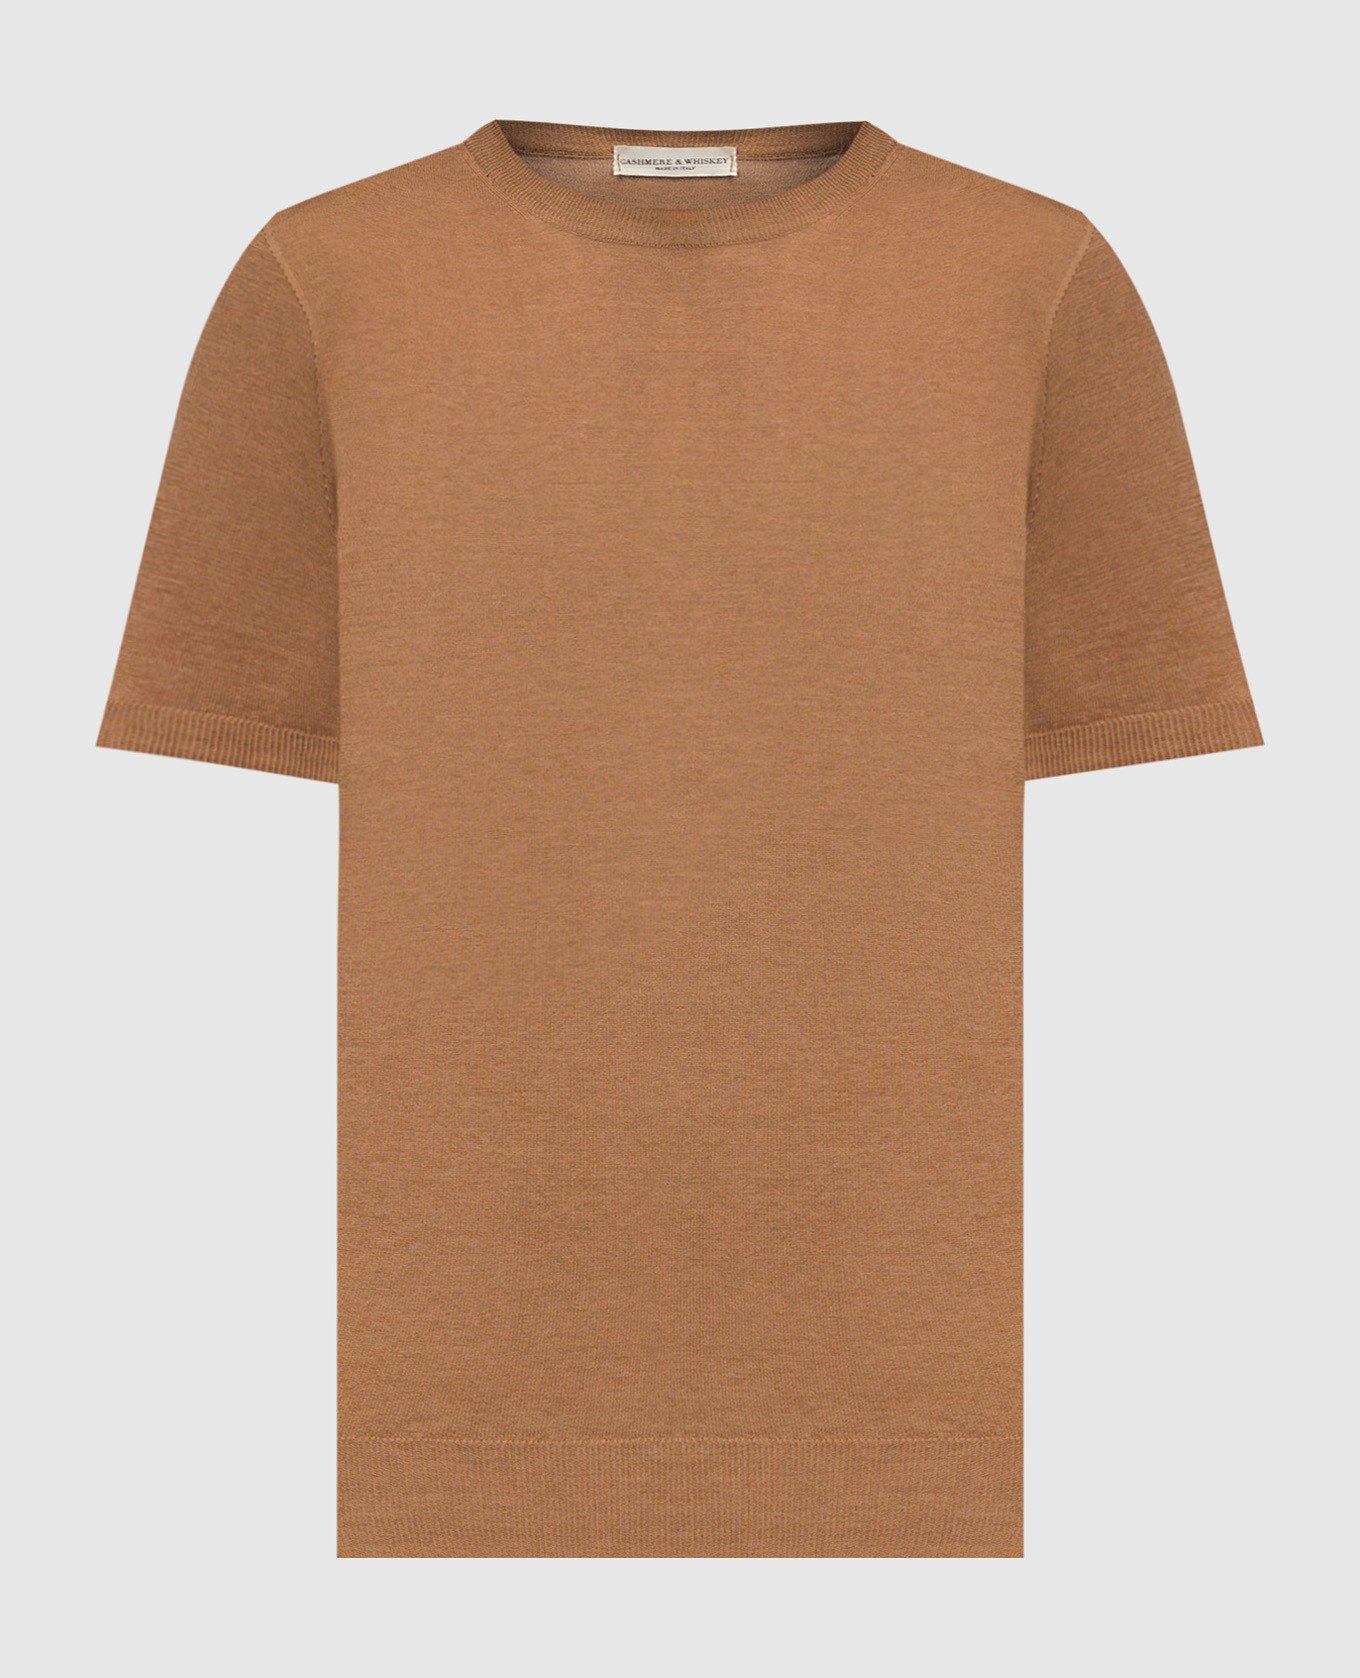 Brown T-shirt with a straight cut in silk and cashmere